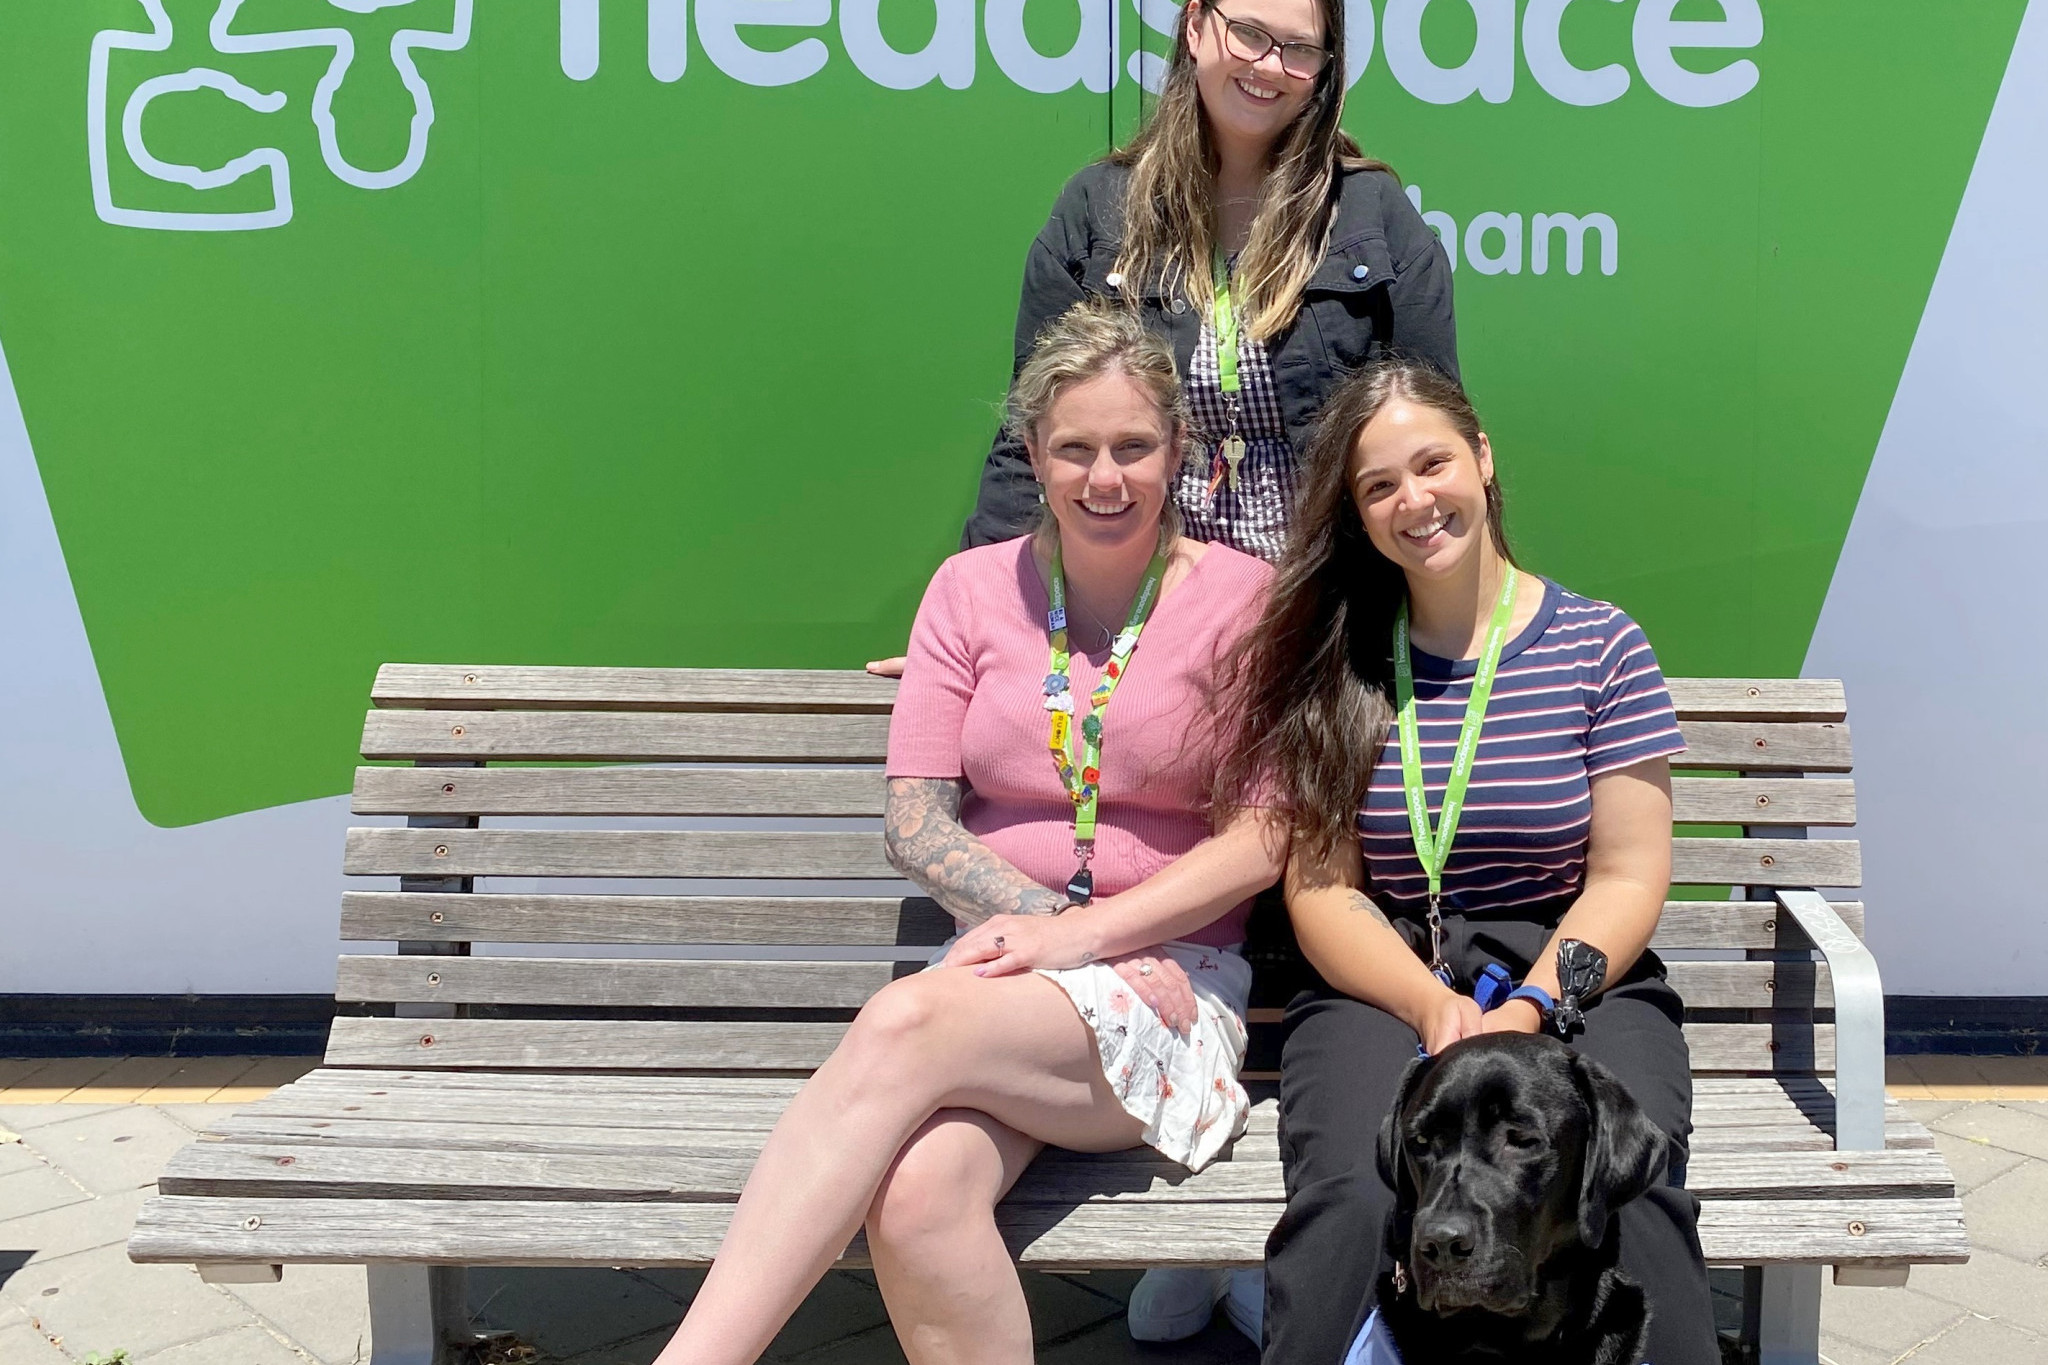 Youth outreach worker Cassandra Jeffrey (back) with client services officer Kate Adams, Alisha McLaughlin and Louie the therapy dog.